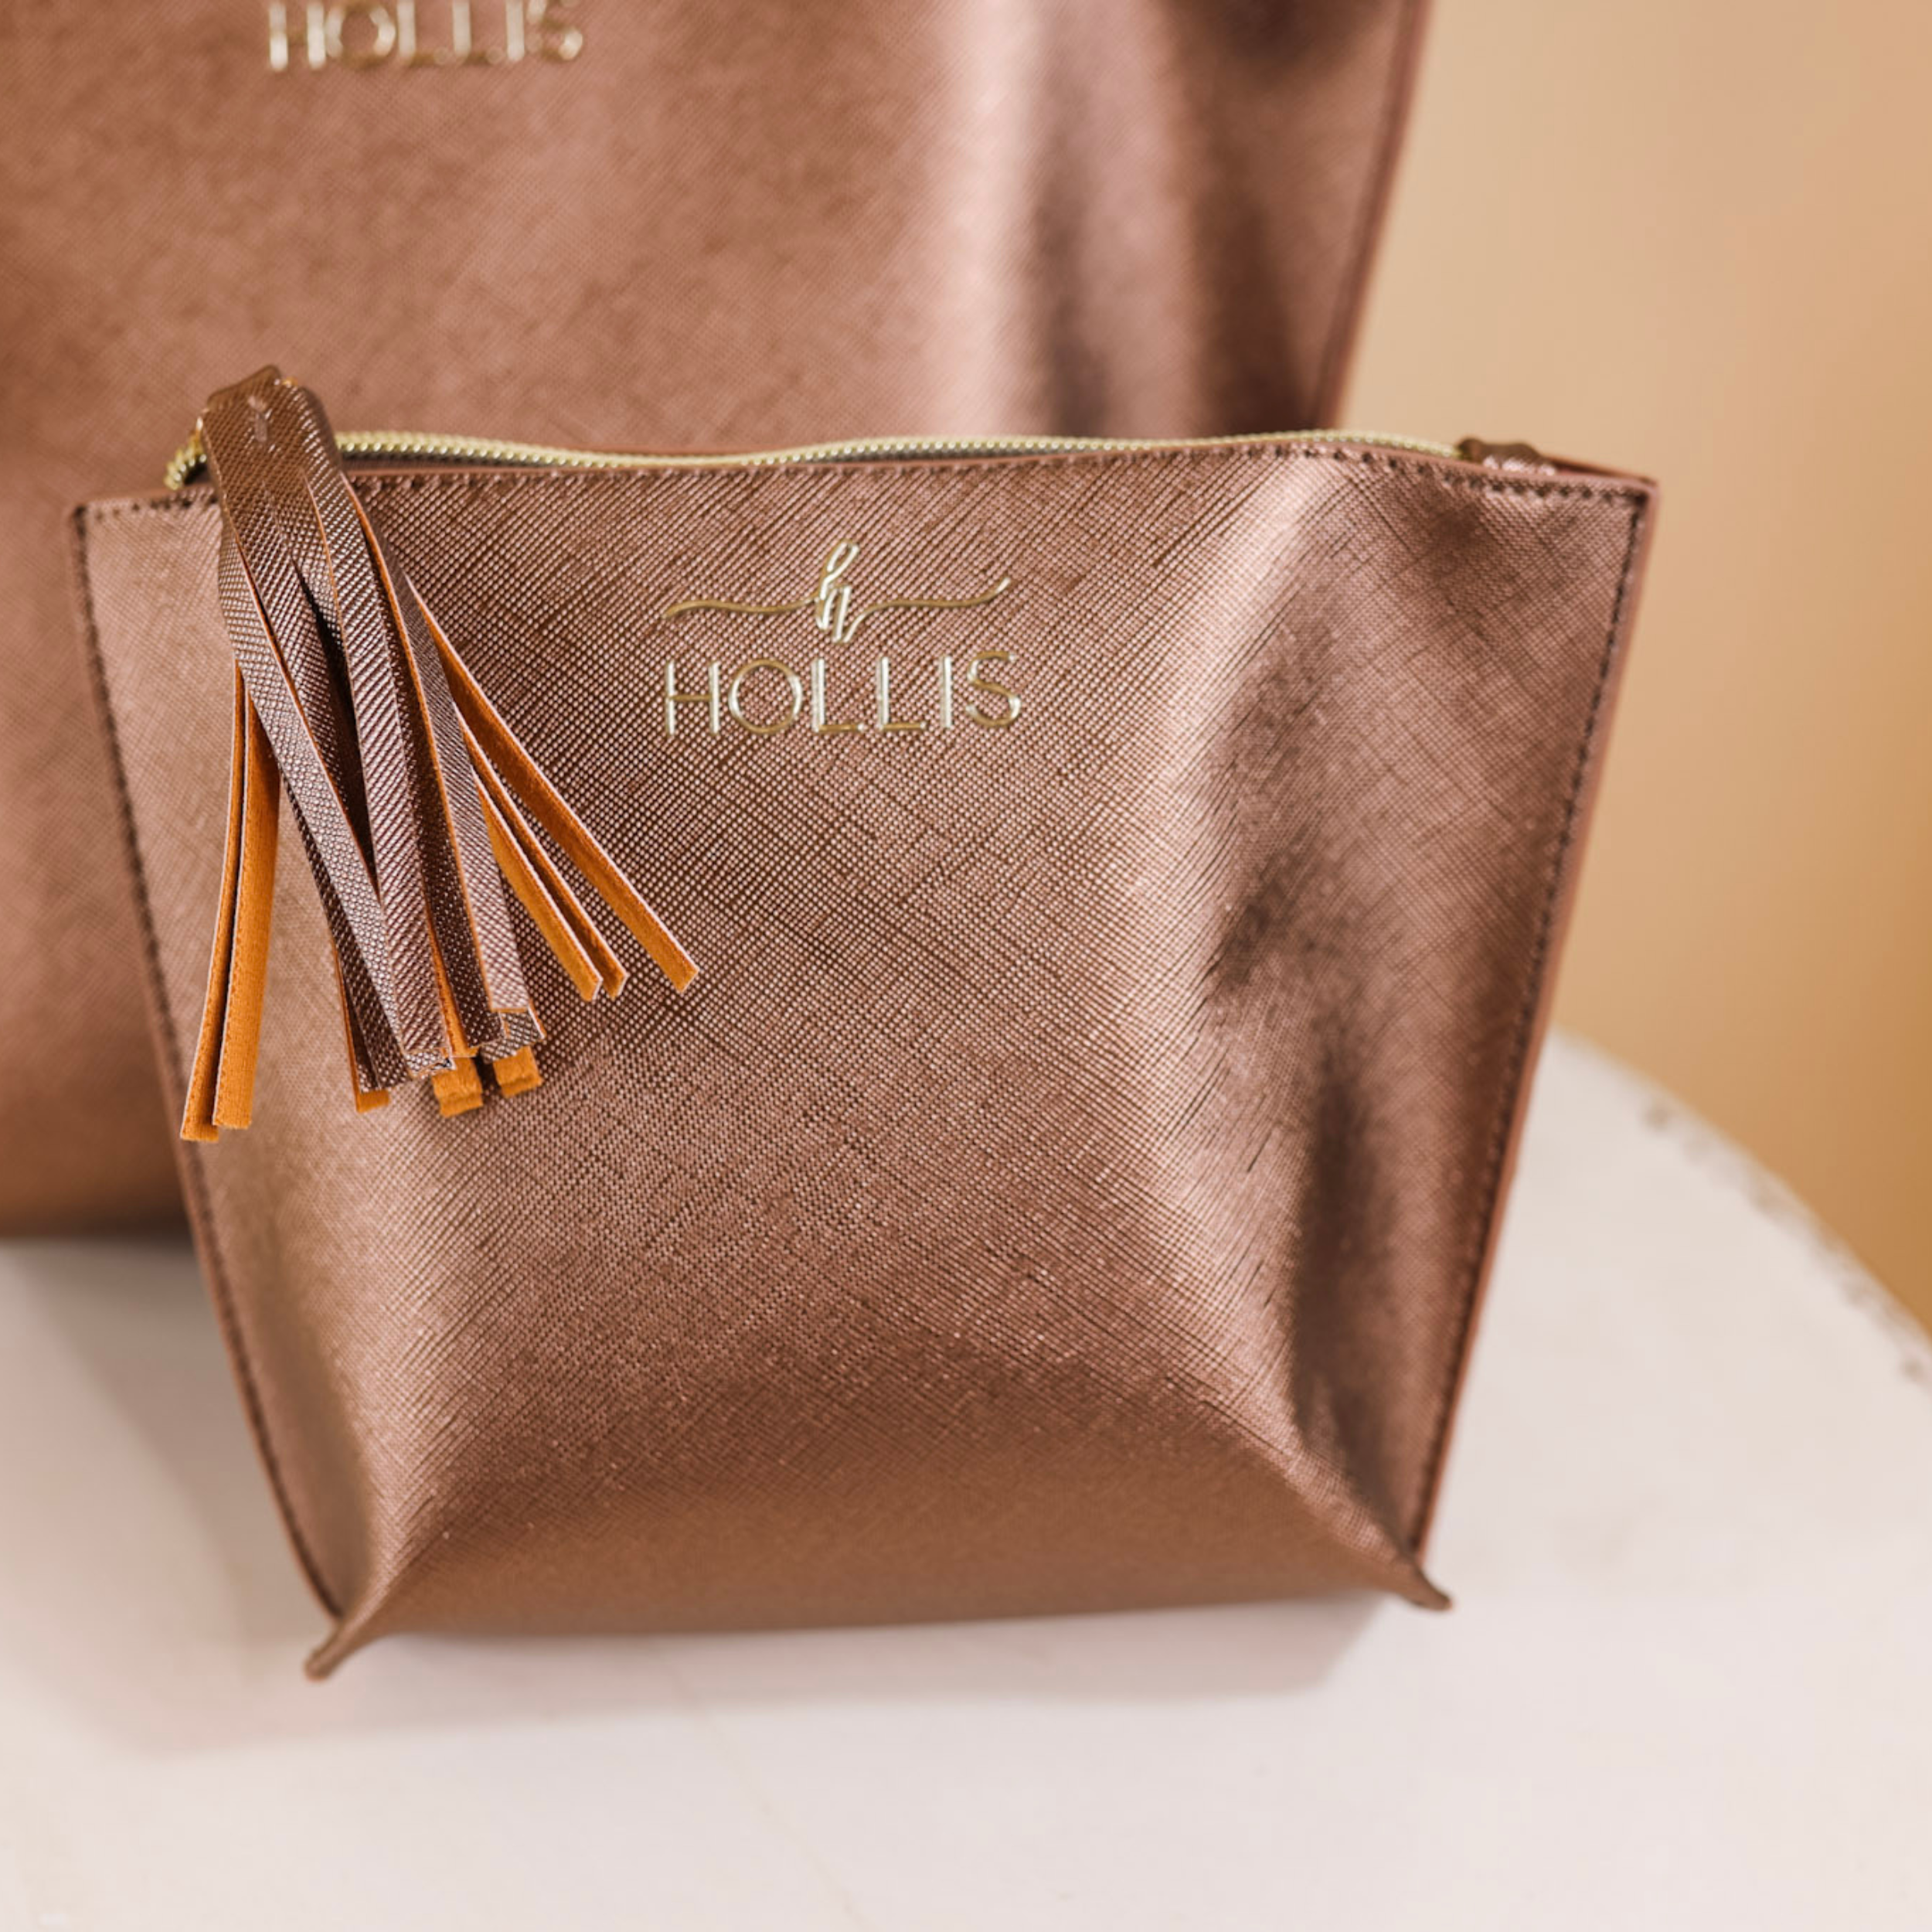 A mocha metallic bag is laid in the center of the picture. Background is solid white.